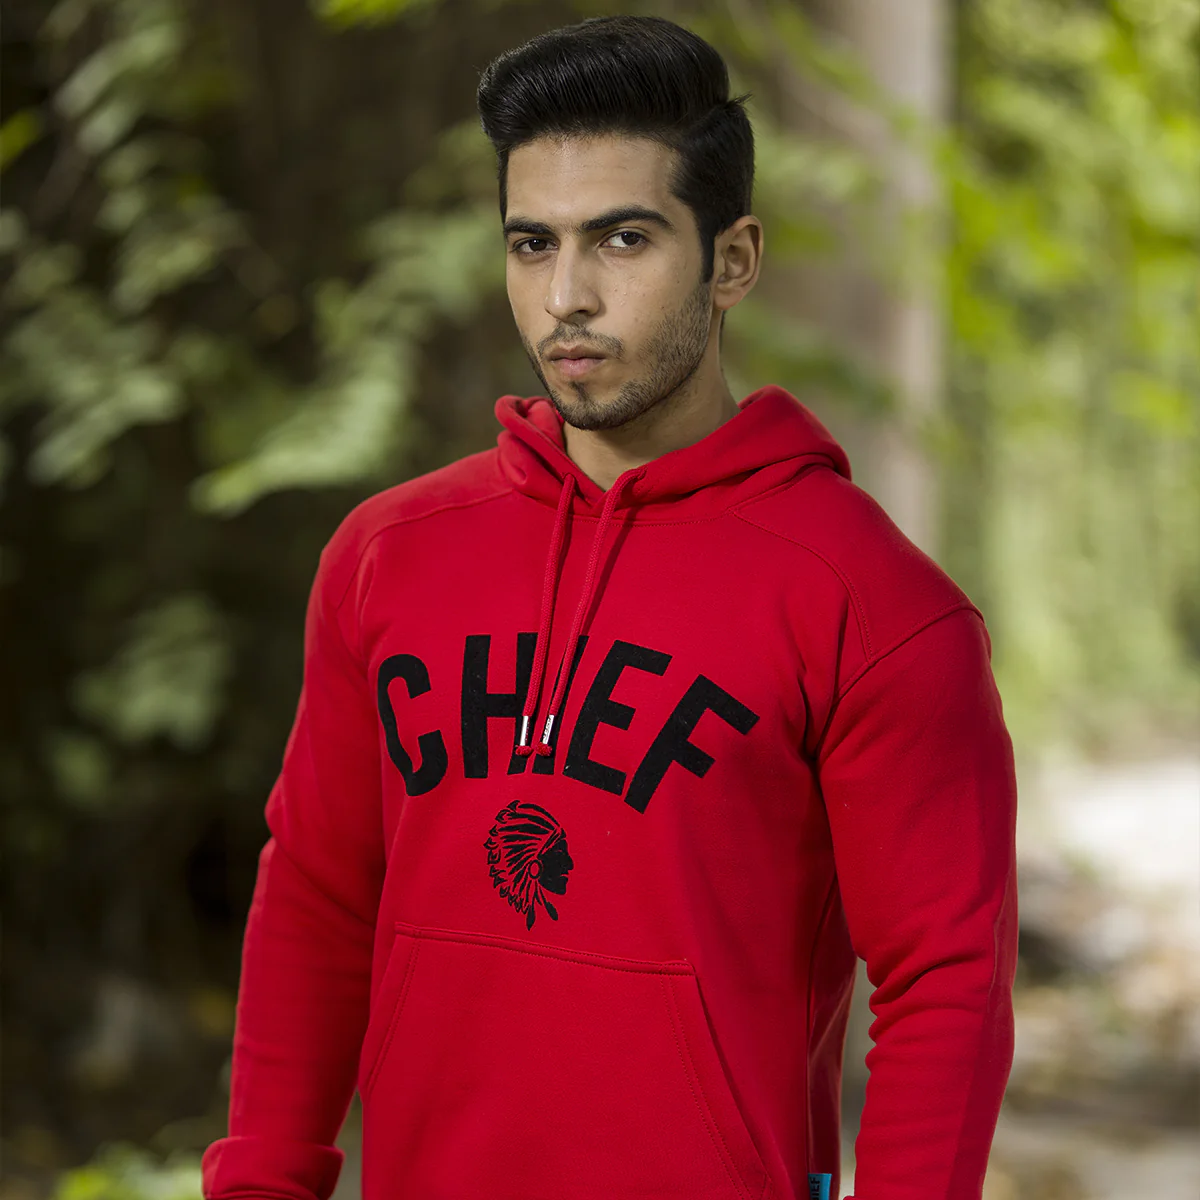 Burgundy Red Classic Hooded Sweatshirt: Timeless Elegance and Comfort